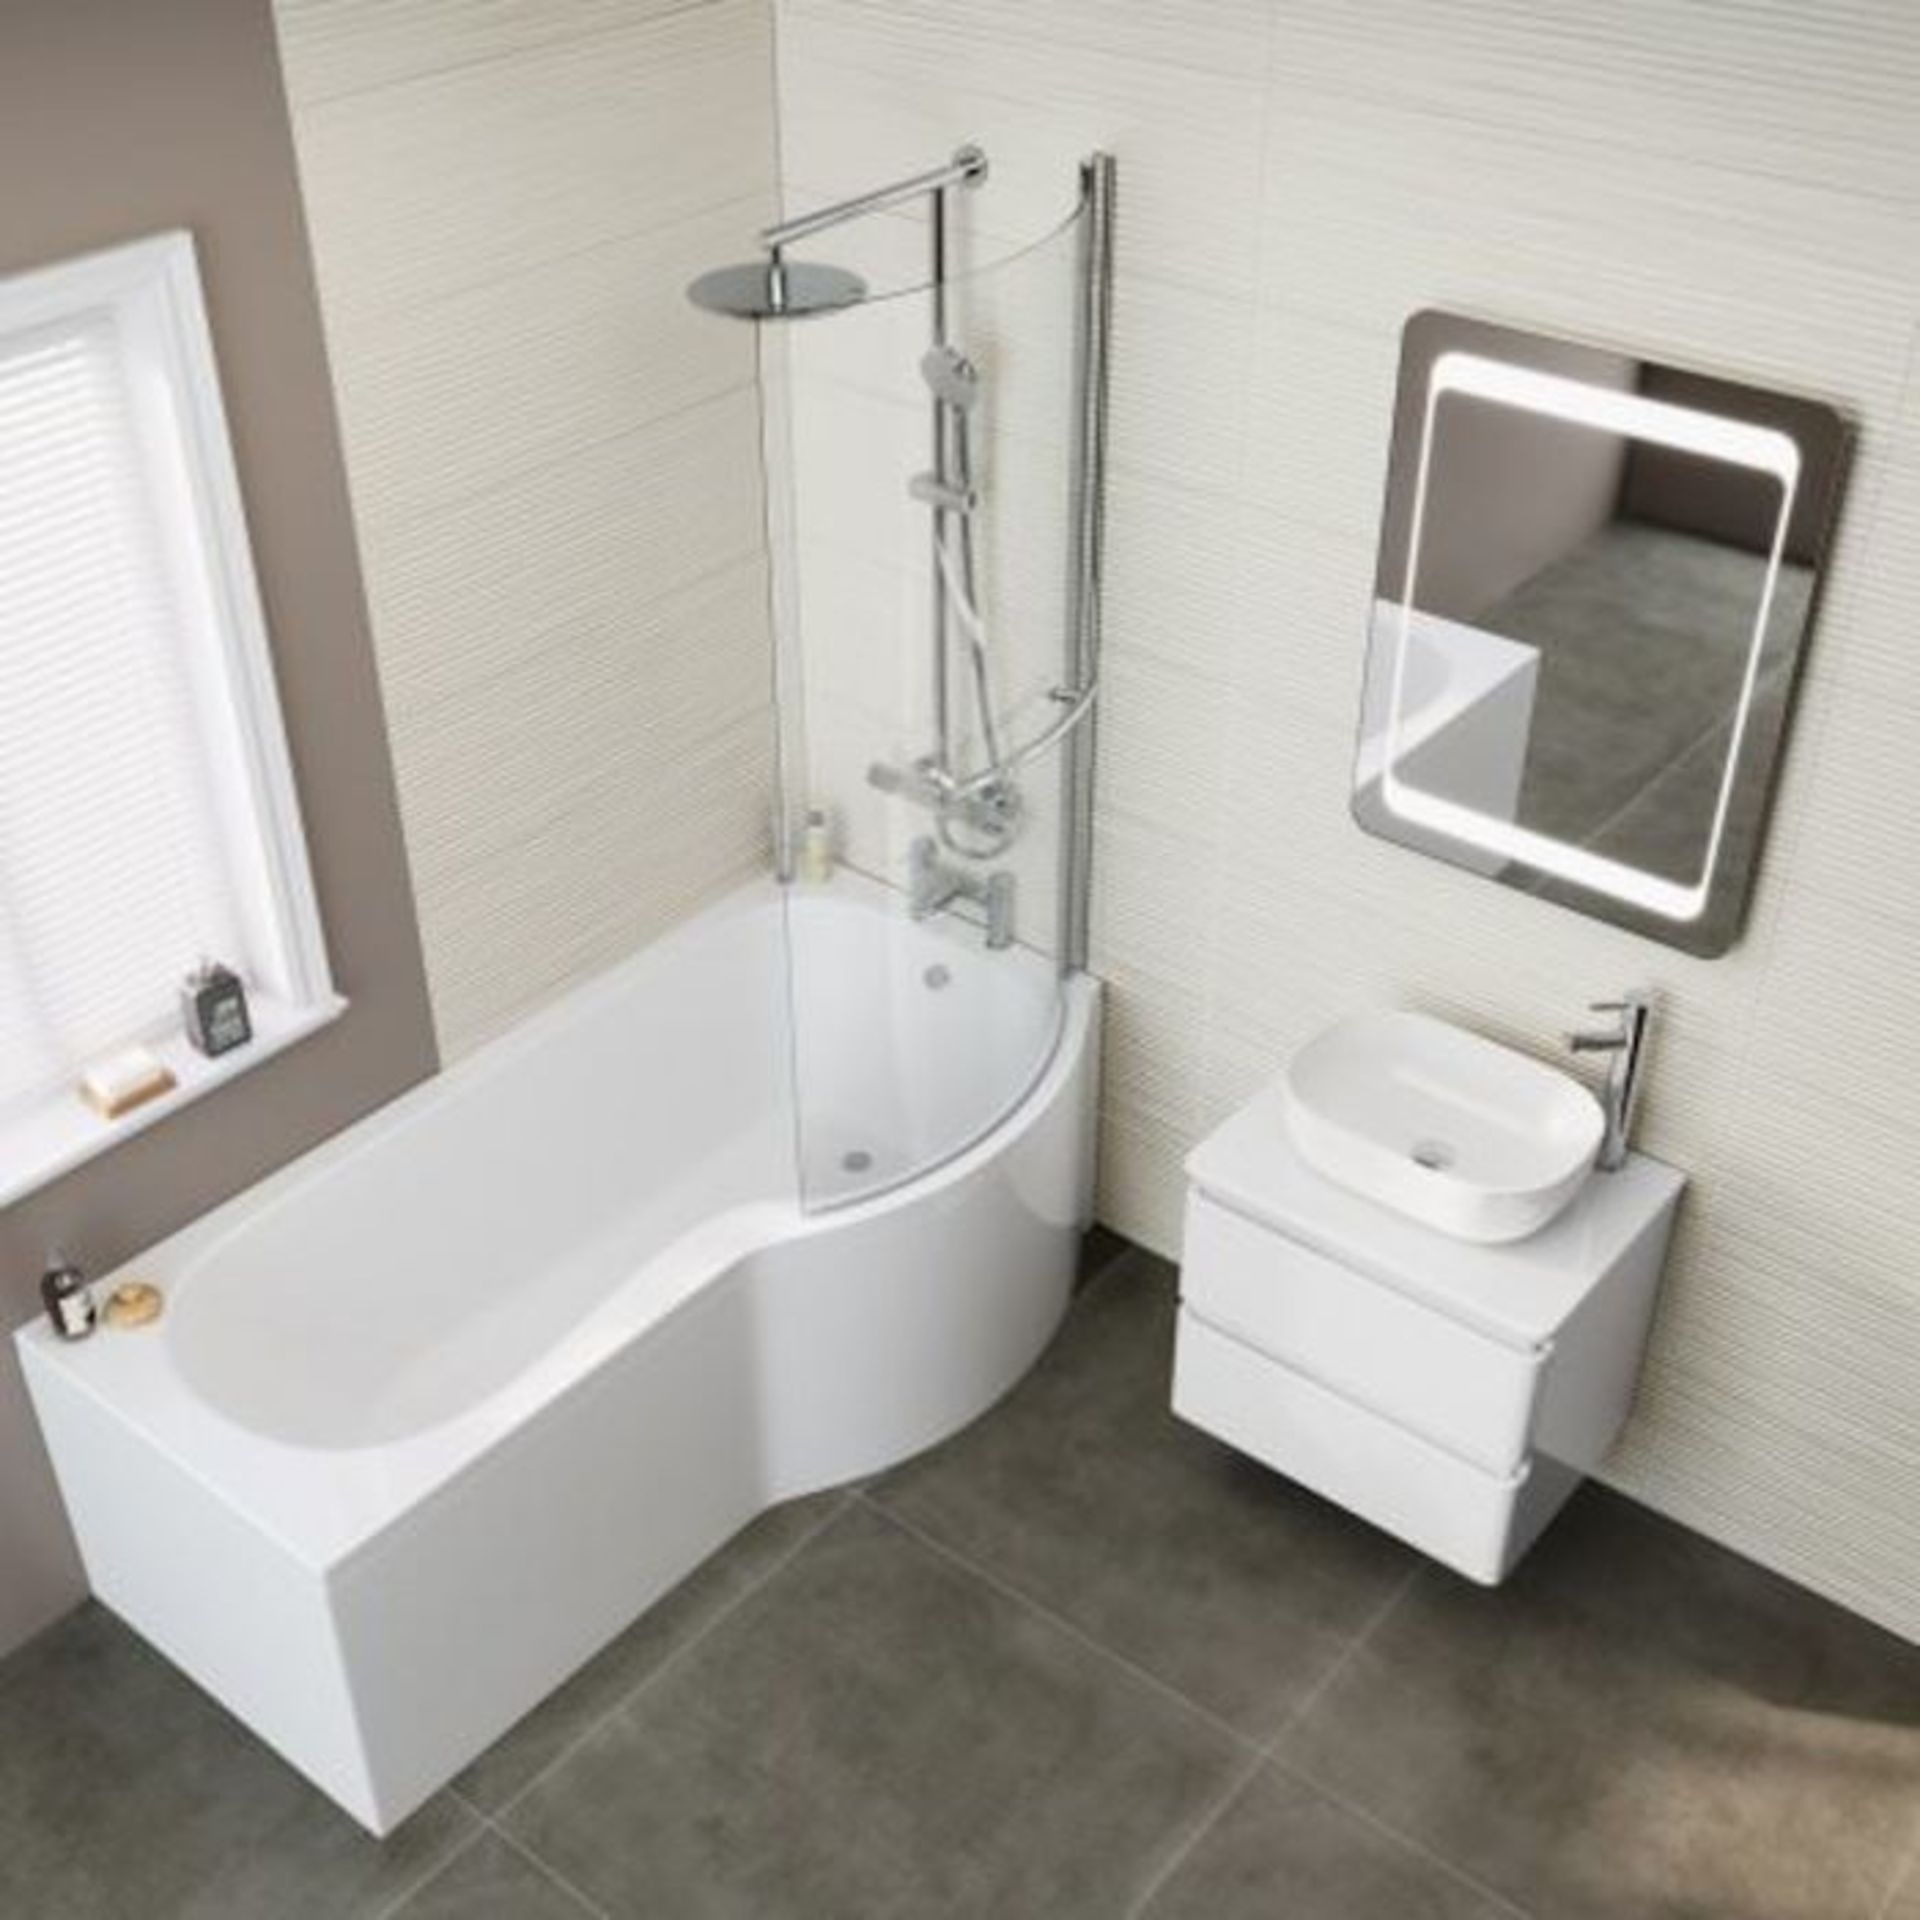 NEW (L47) 1700x850mm - P-Shaped Bath.. RRP £399.99. Ideal space saving solution for smaller b... - Image 3 of 3